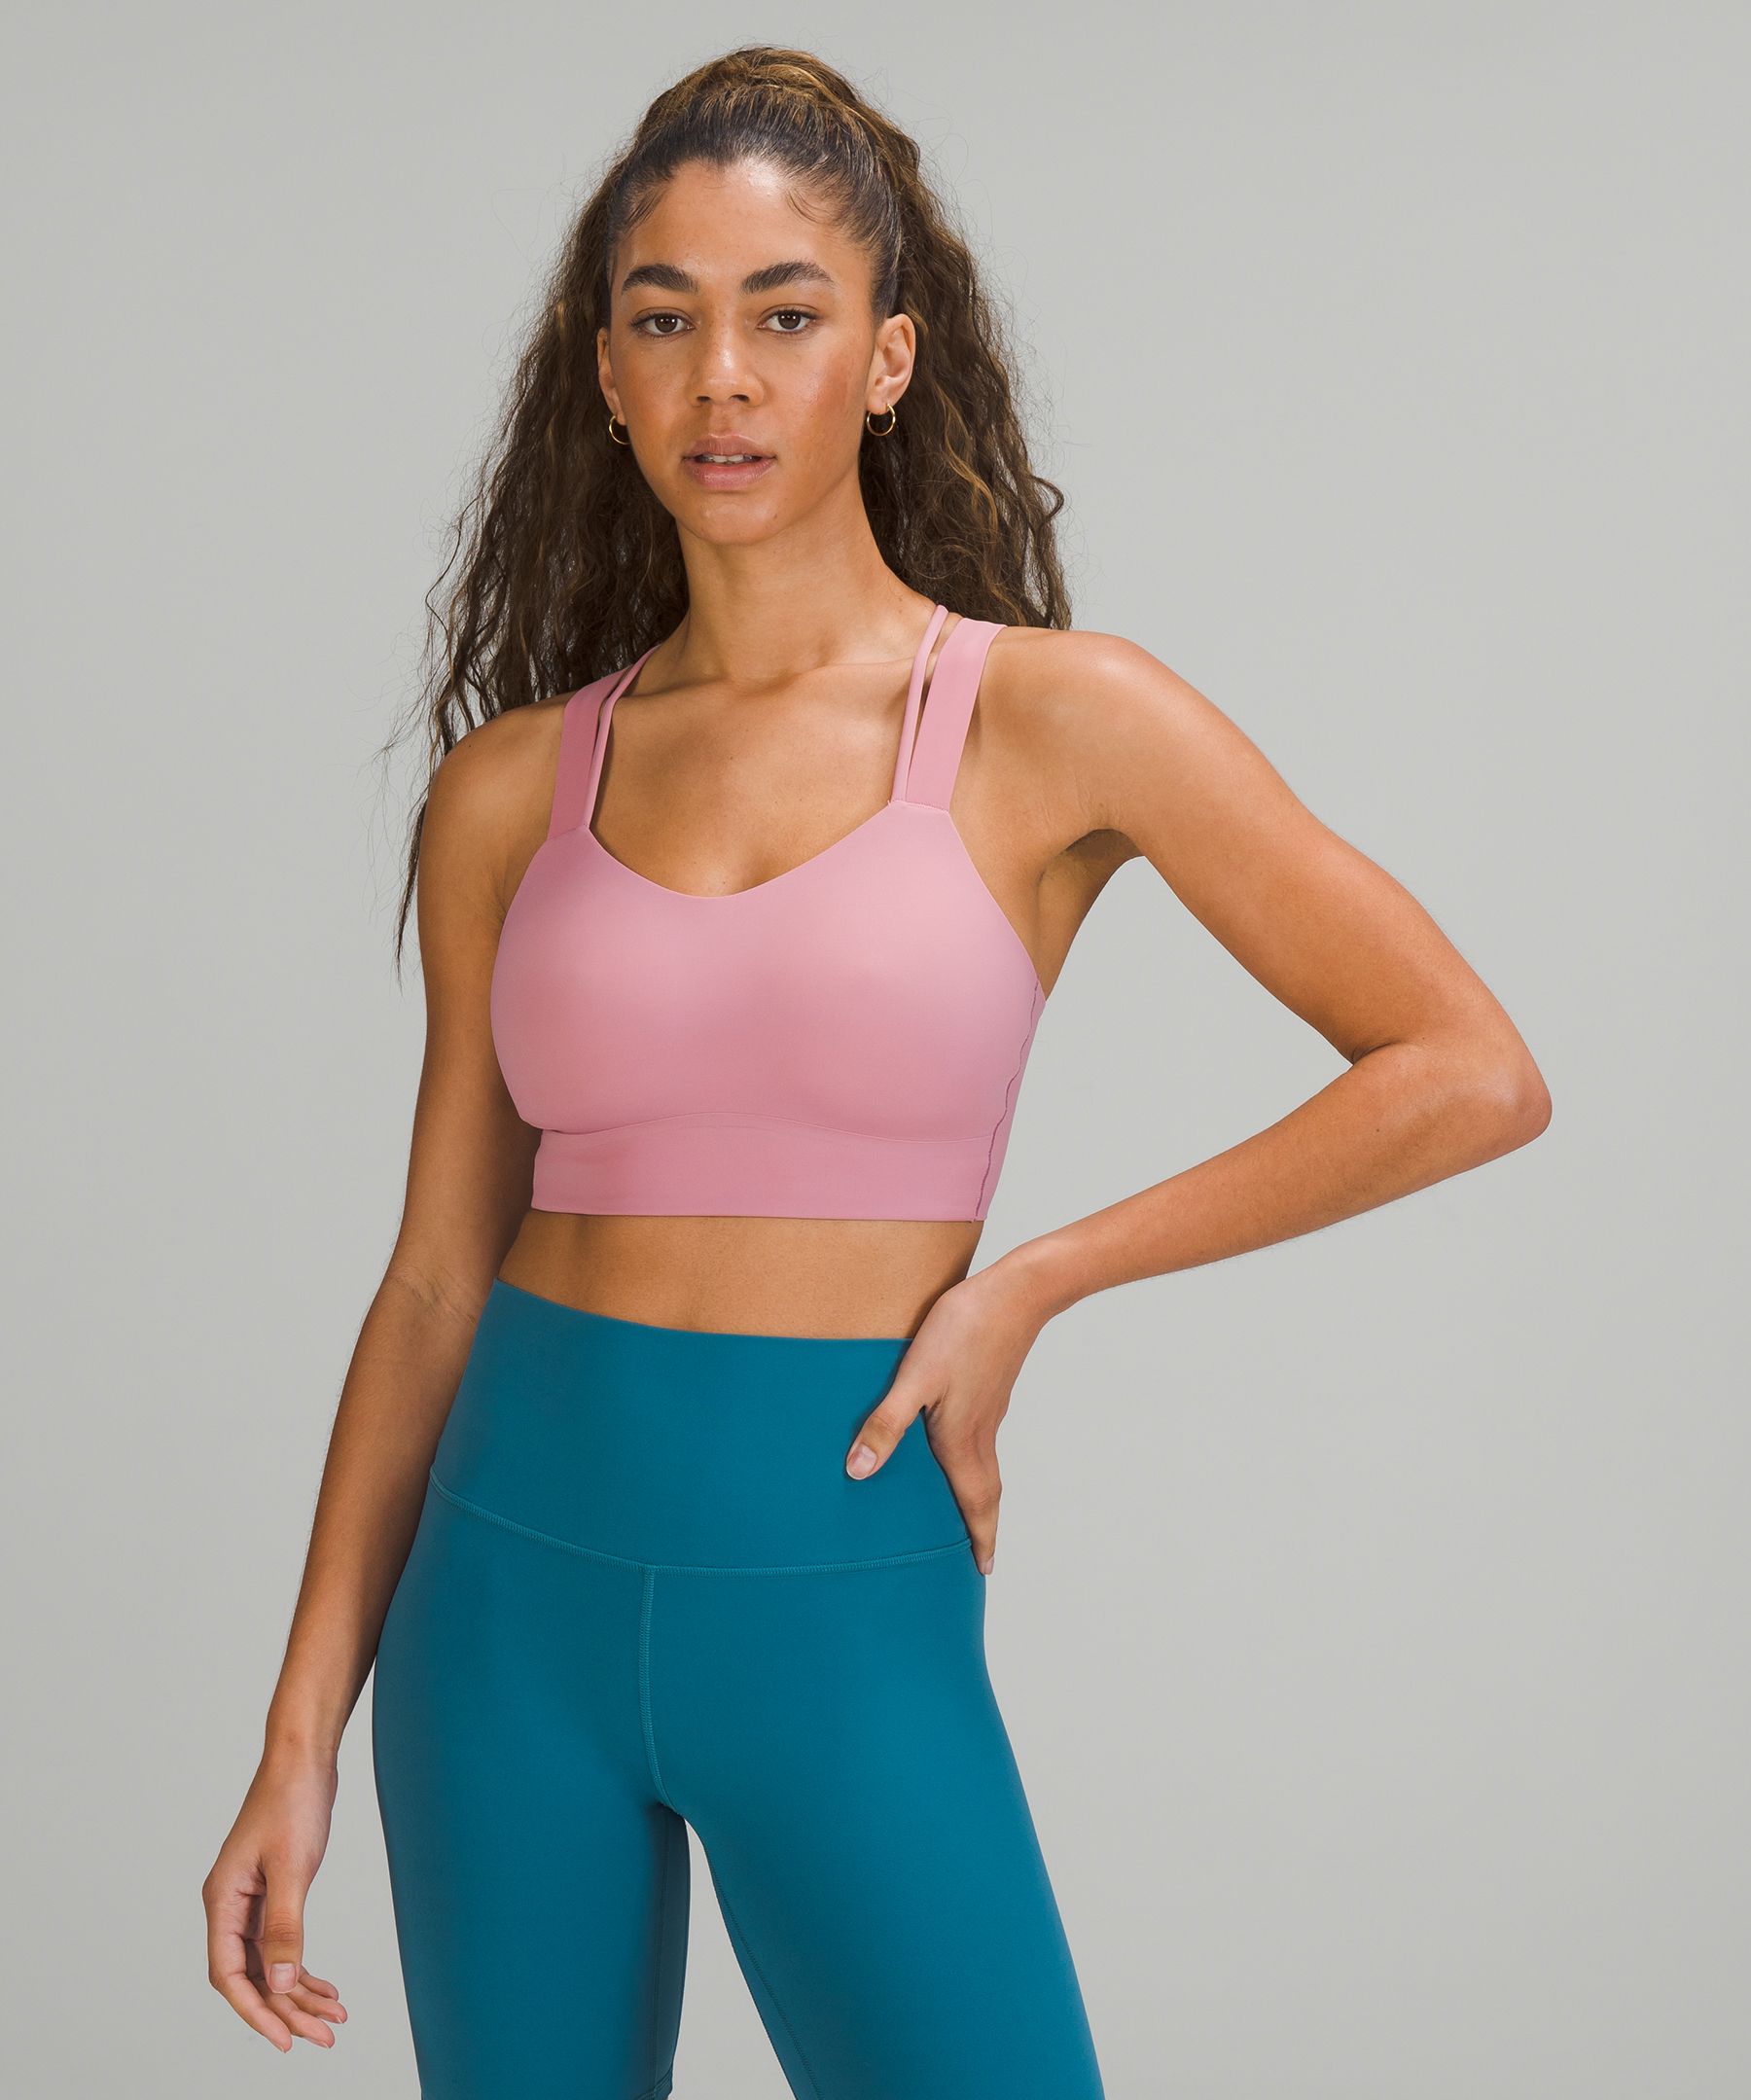 Lululemon Like A Cloud Longline Bra Light Support, D/dd Cup In Pink Taupe